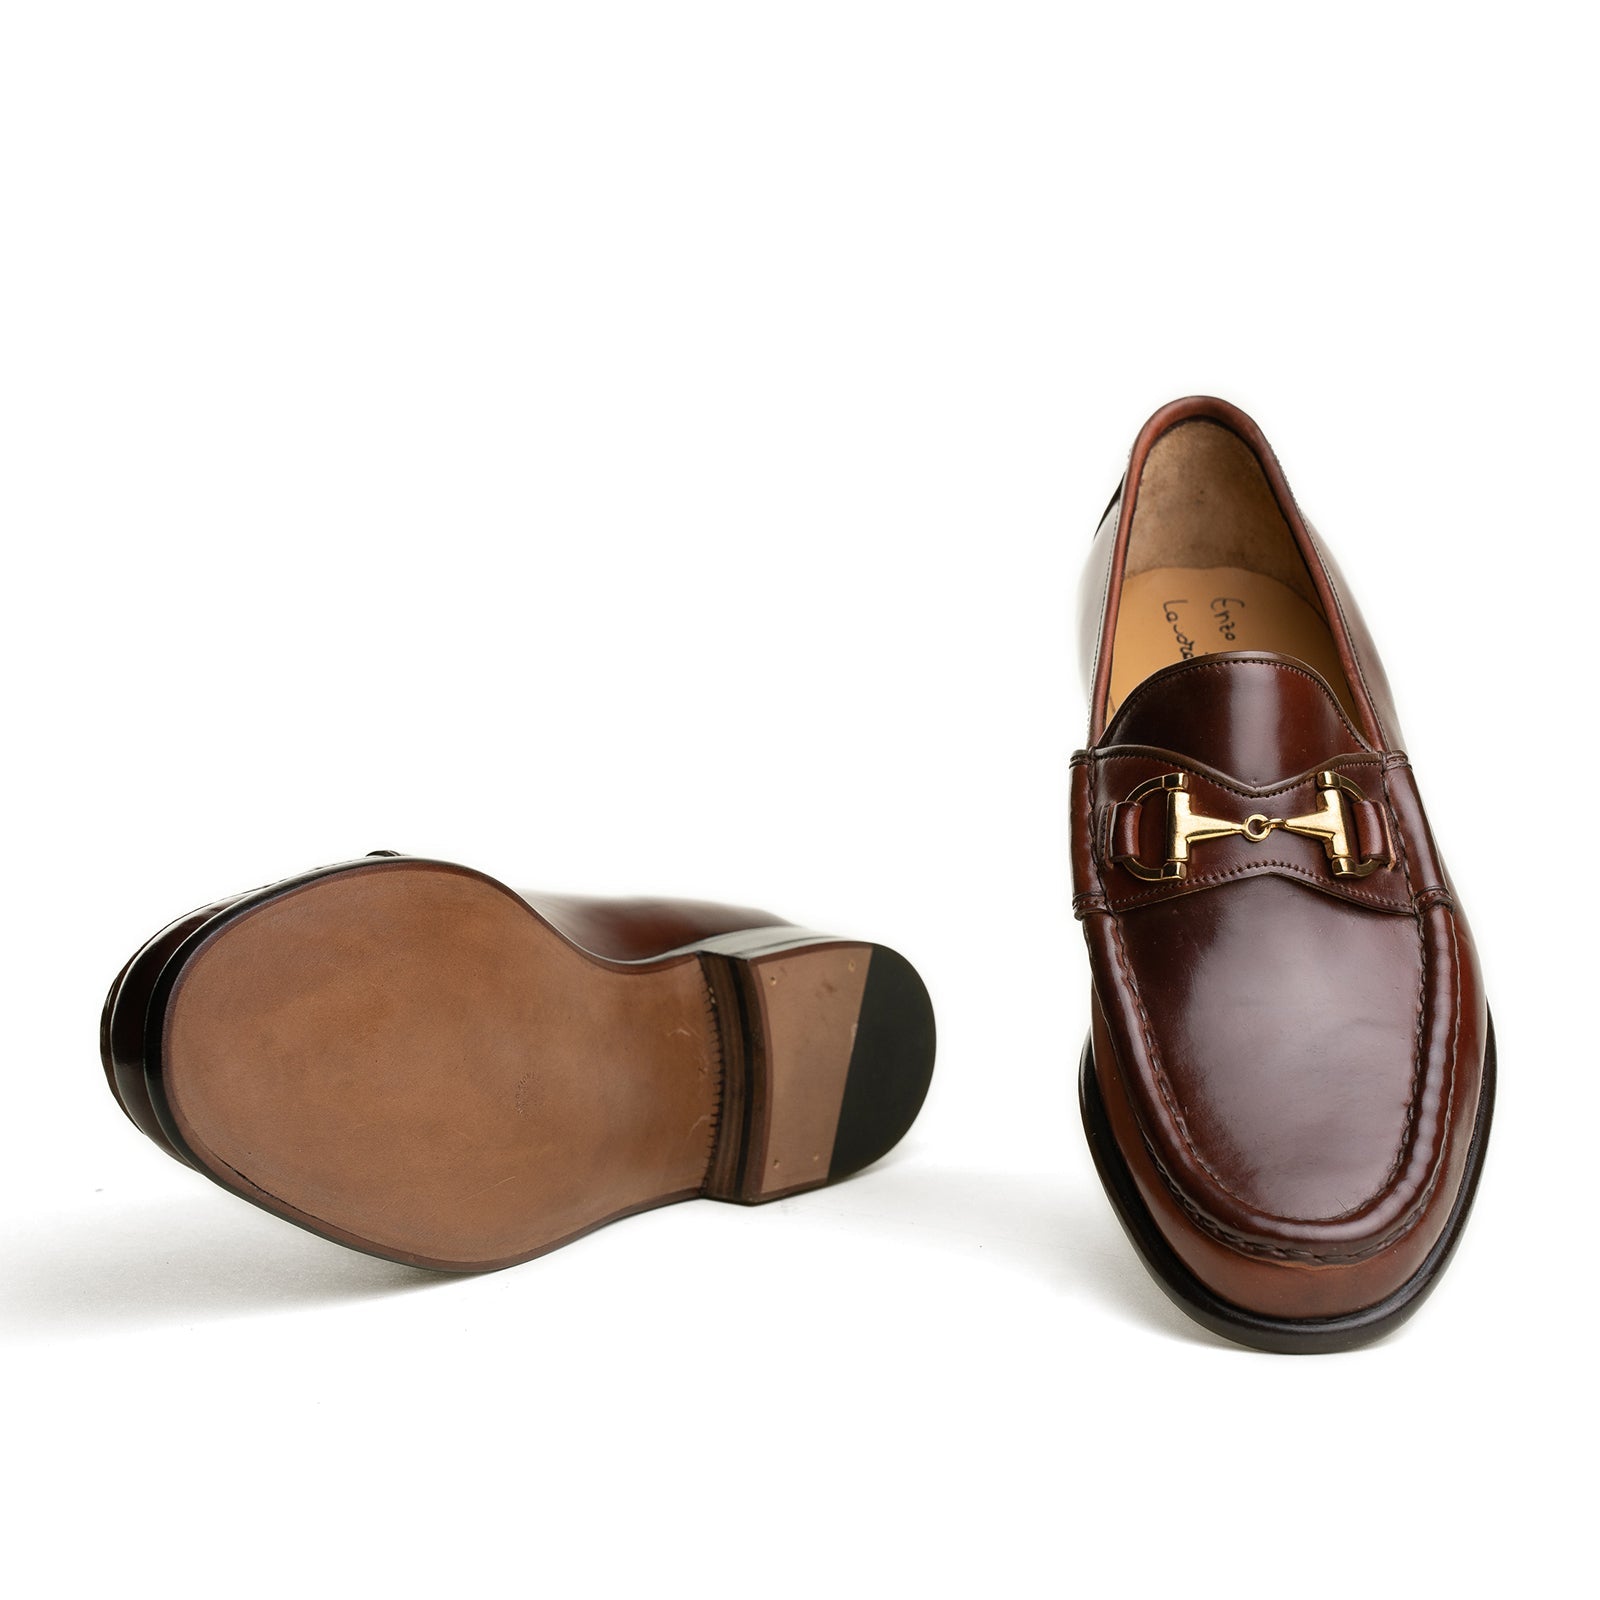 Style 2695 - Horween Cordovan Col. 4